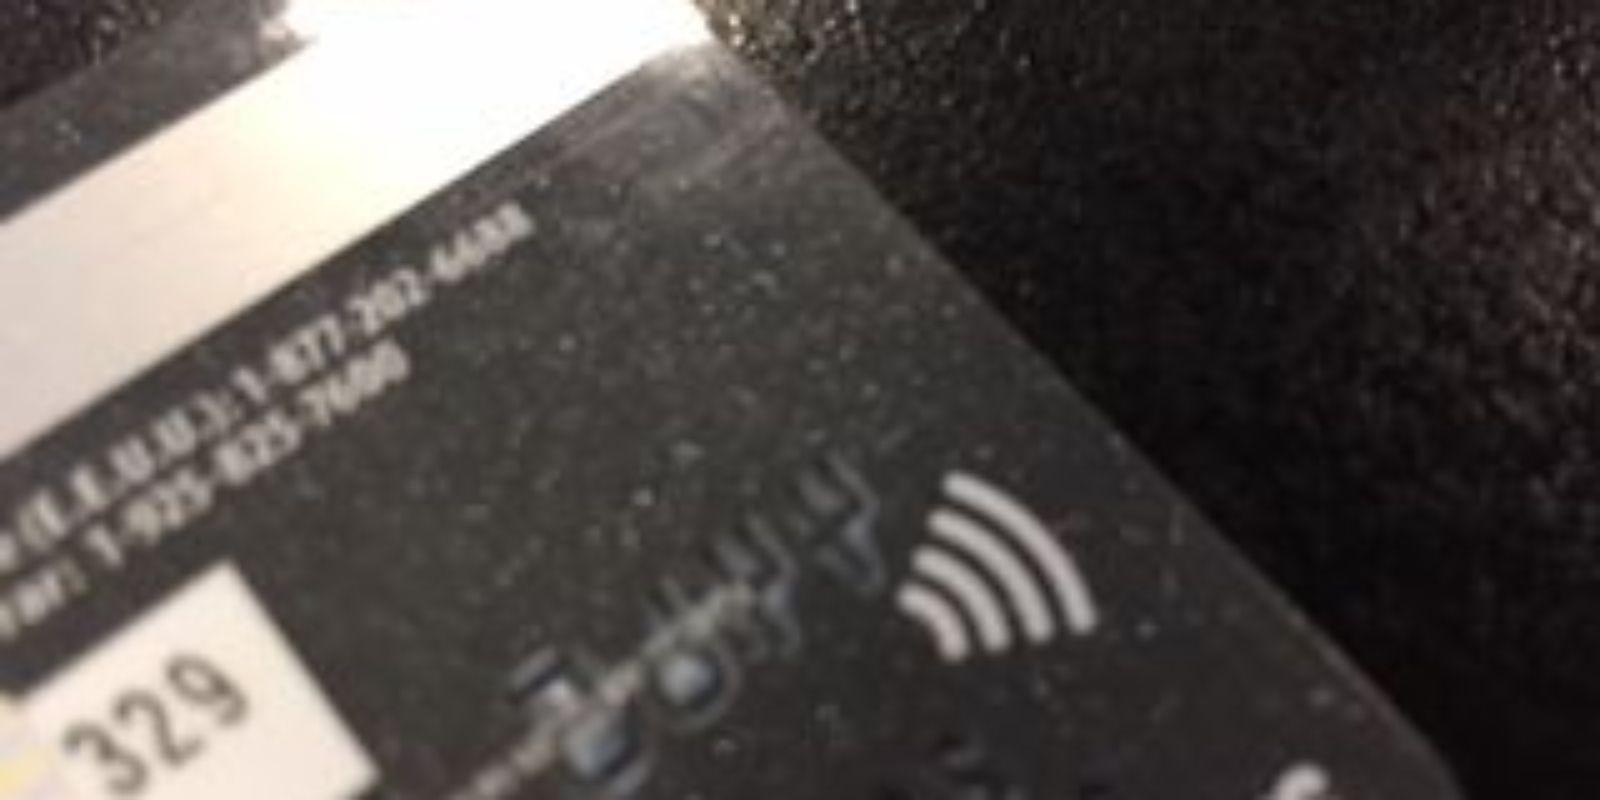 Sideways Wi-Fi Logo - Do You Have A WiFi-Looking Symbol On Your Credit Card?